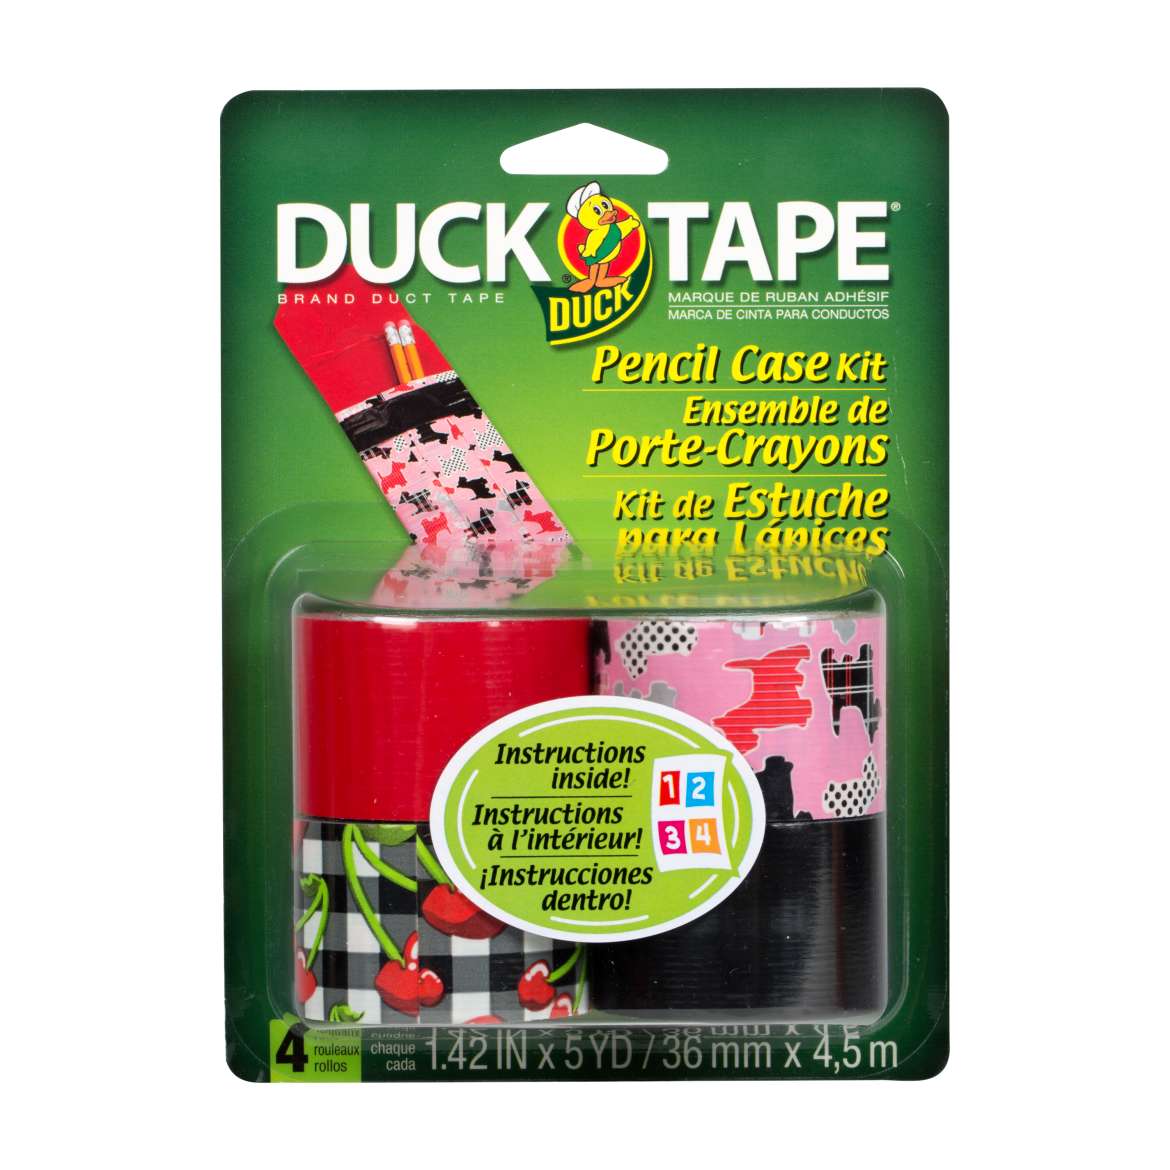 Duck Brand Duct Tape Kit, Pencil Case - image 1 of 2